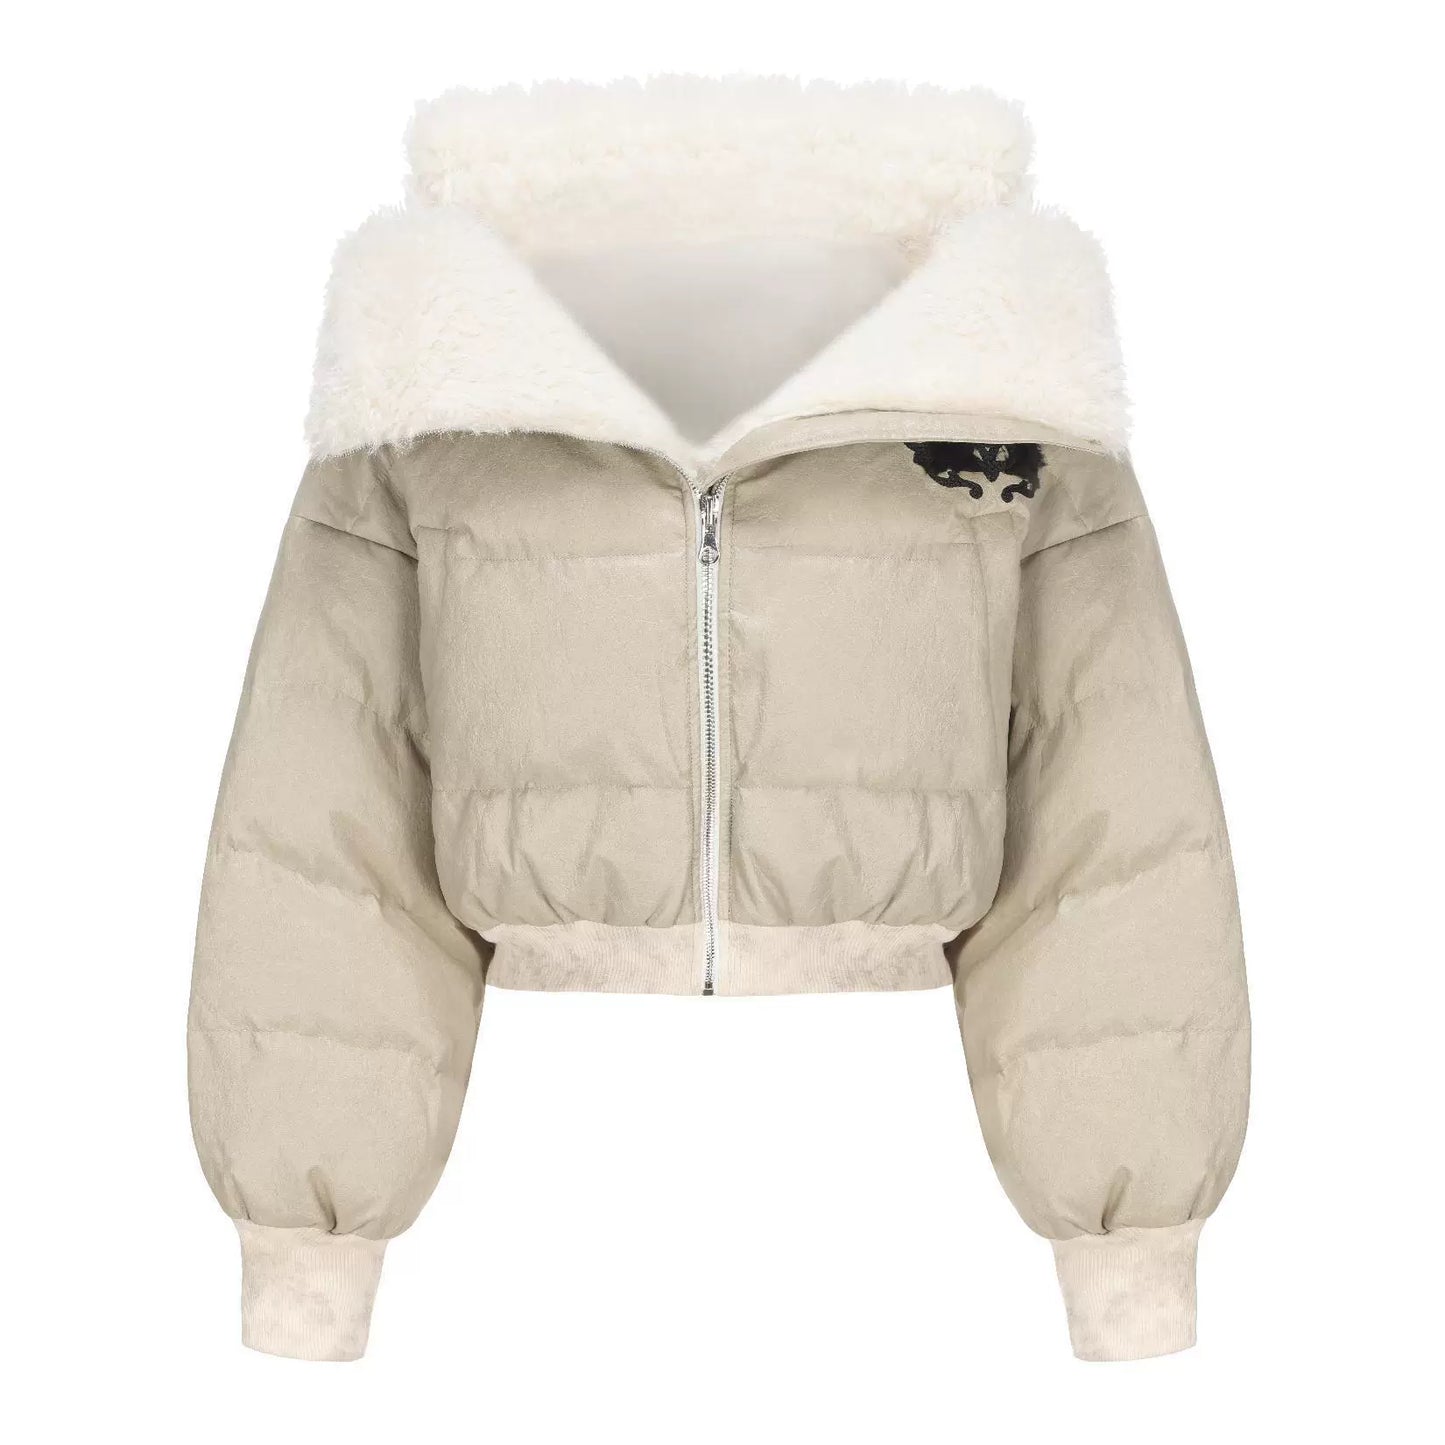 Bread Down Jacket Set - Pull Up Stand Up Collar